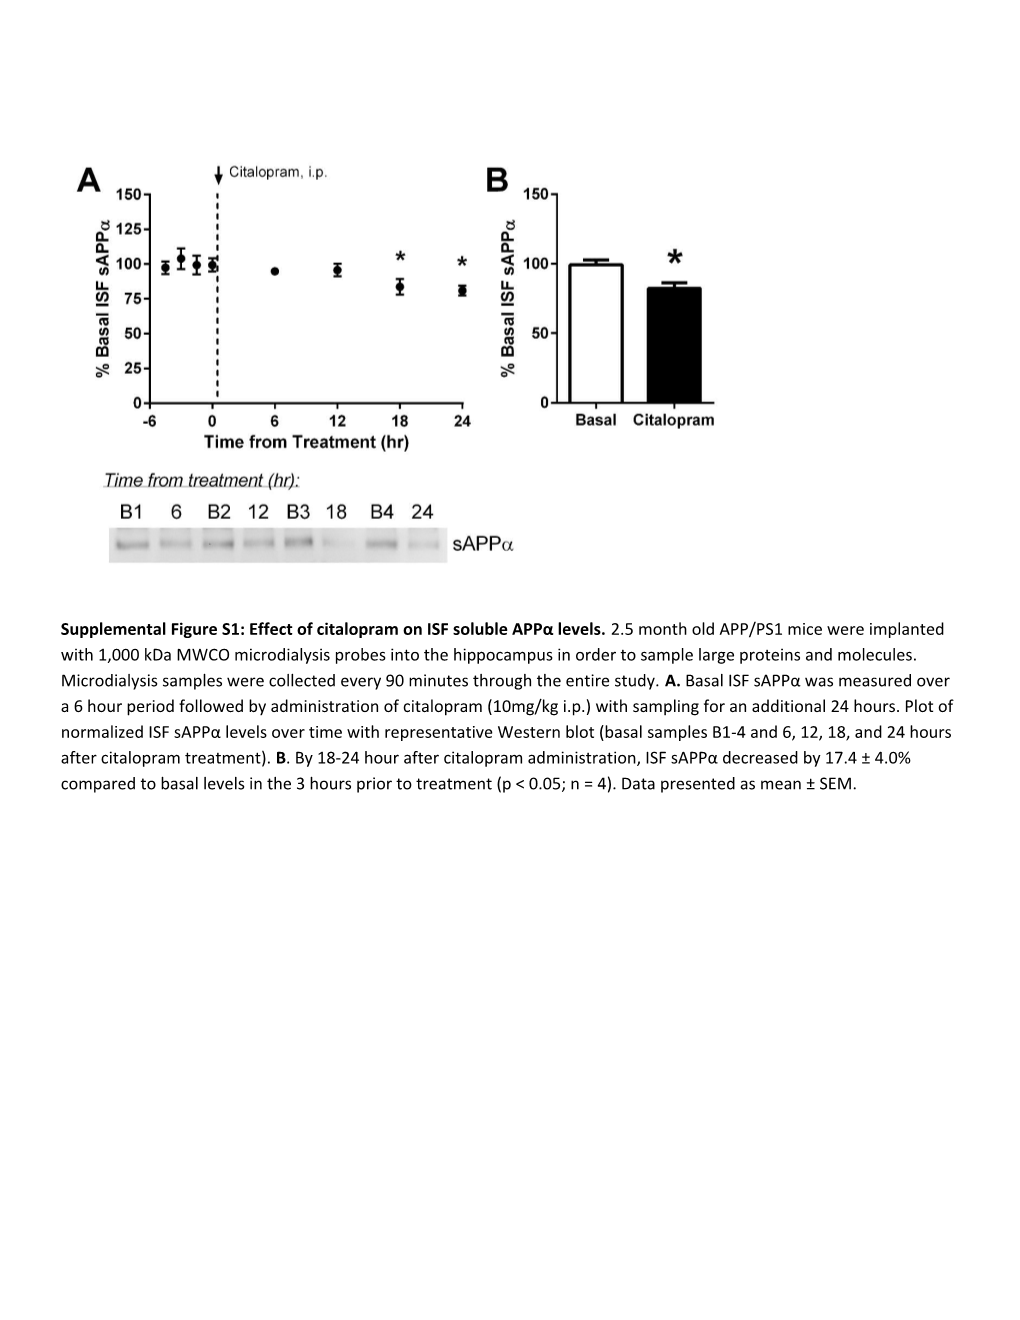 Supplemental Figure S2: Effect of Citalopram on ISF Aβ Oligomers in Young APP/PS1 Mice